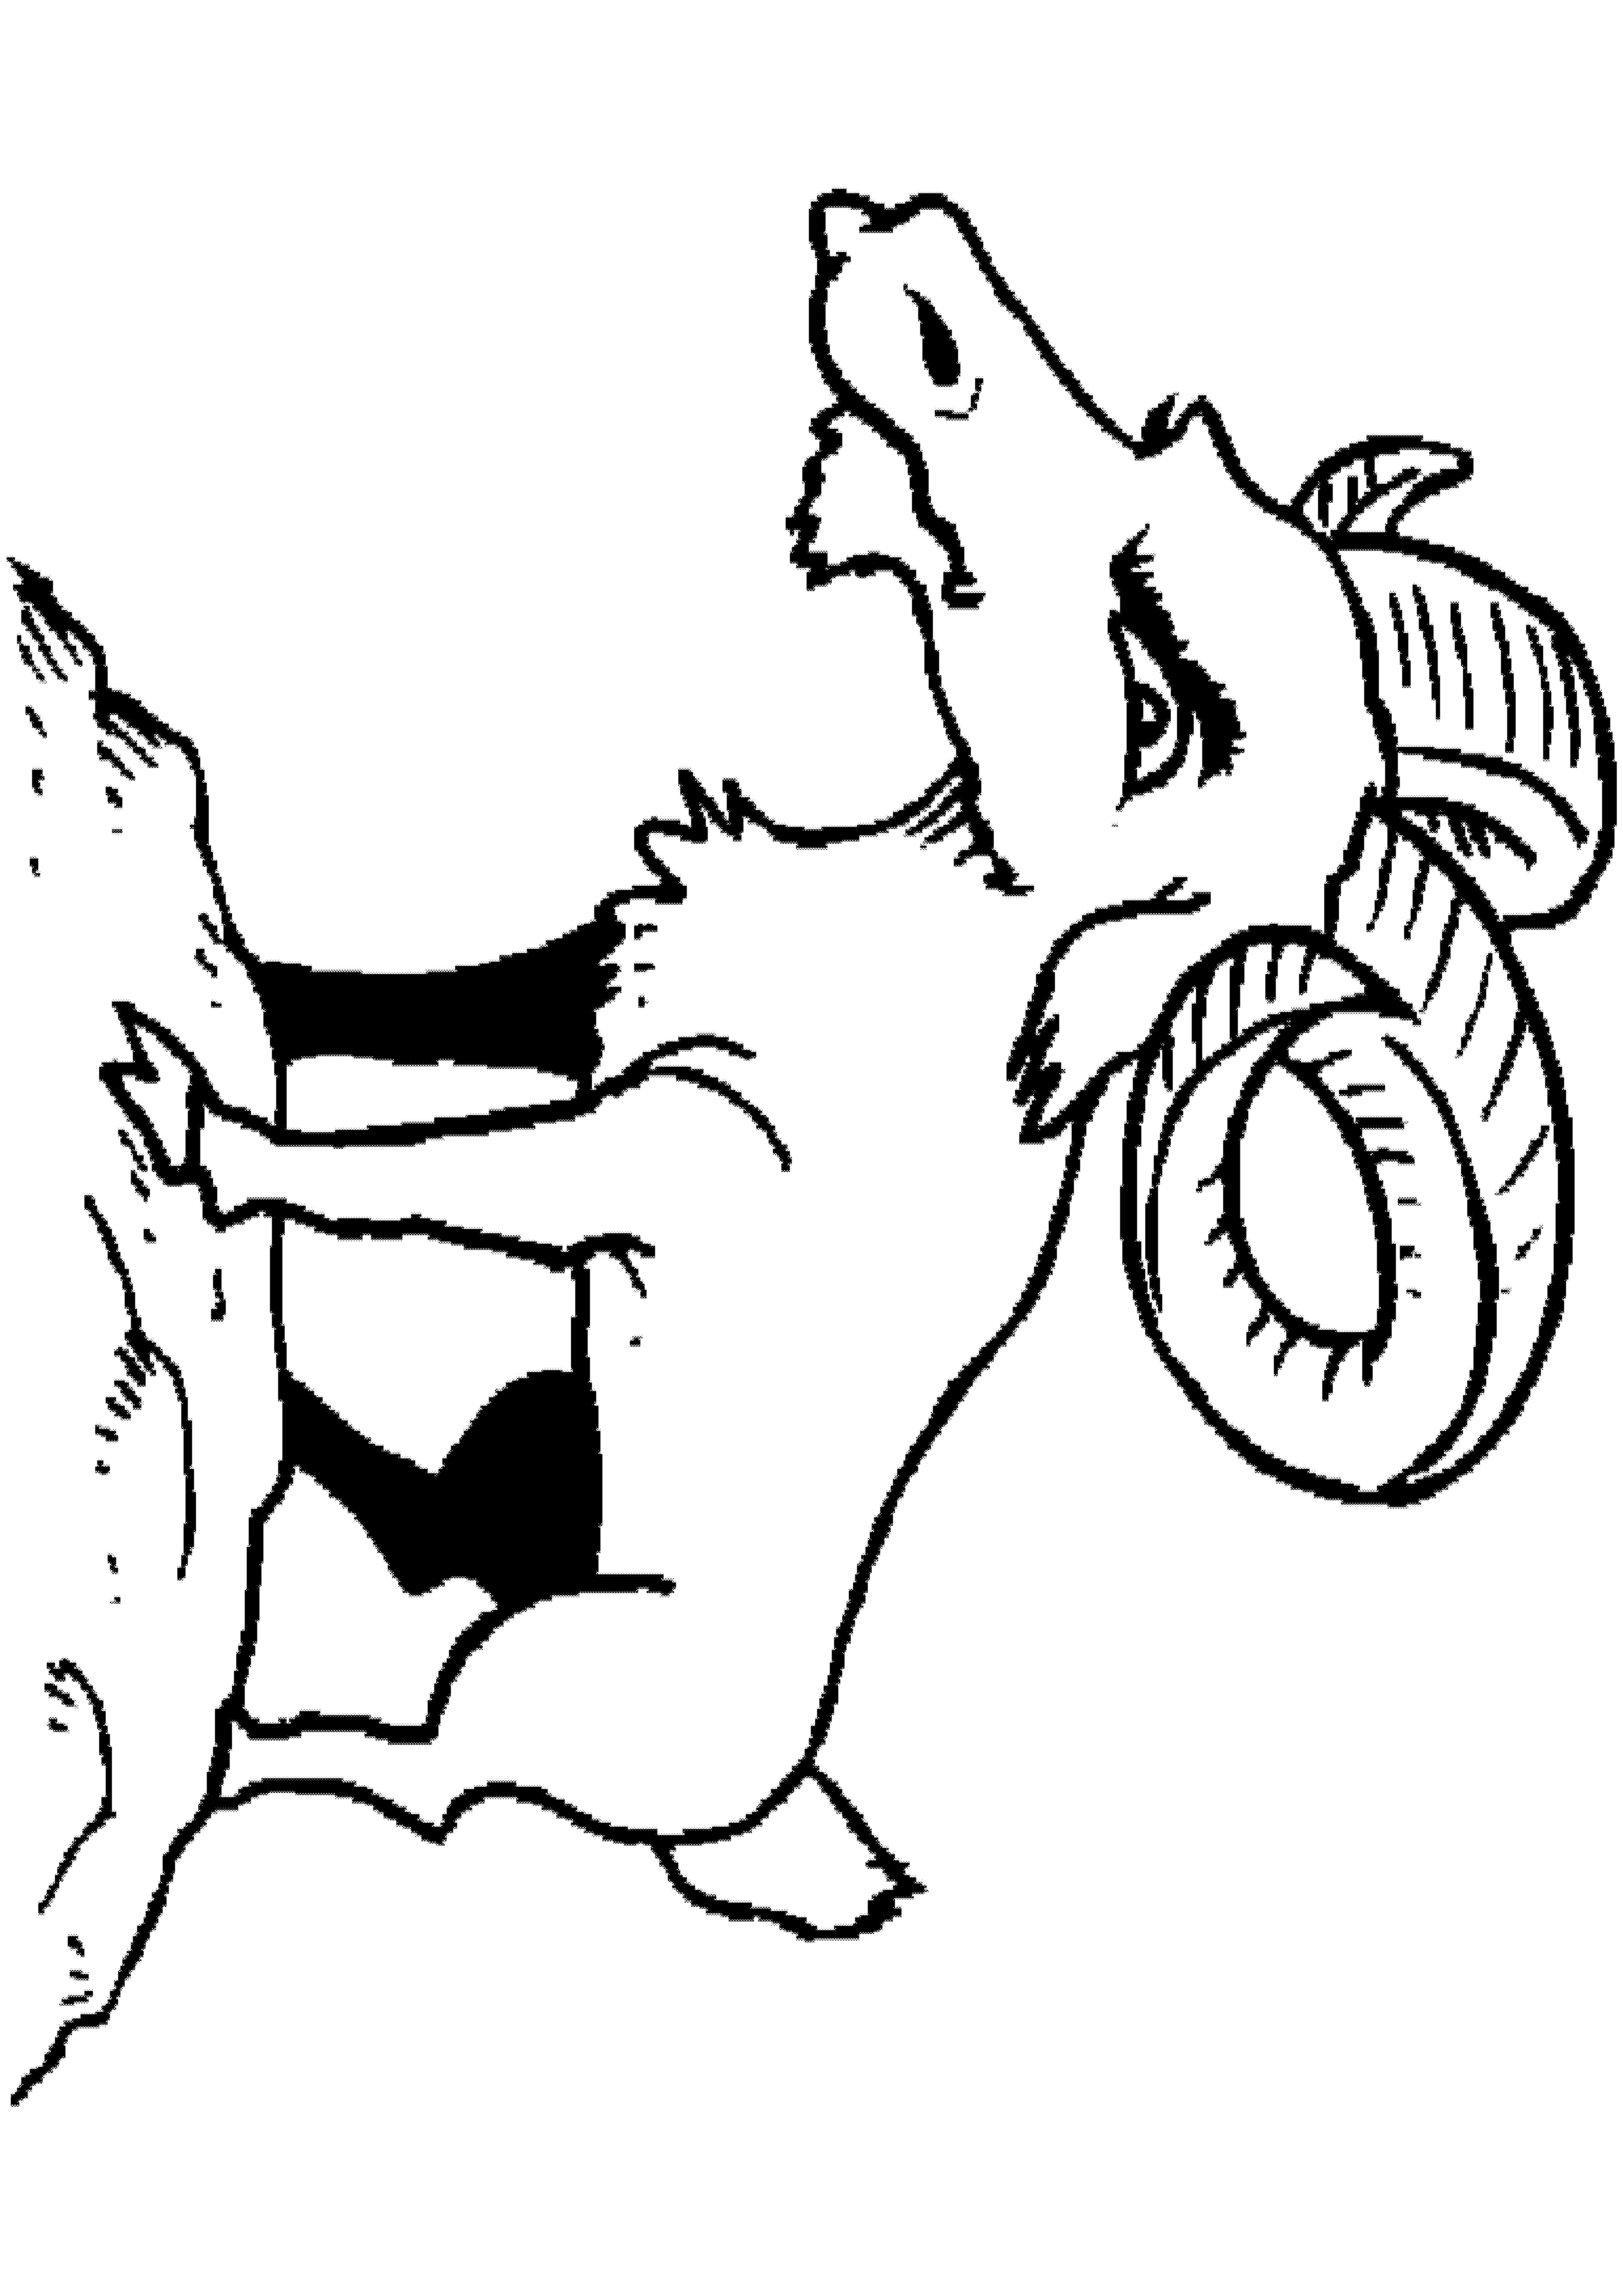 goat-coloring-page-0001-q1